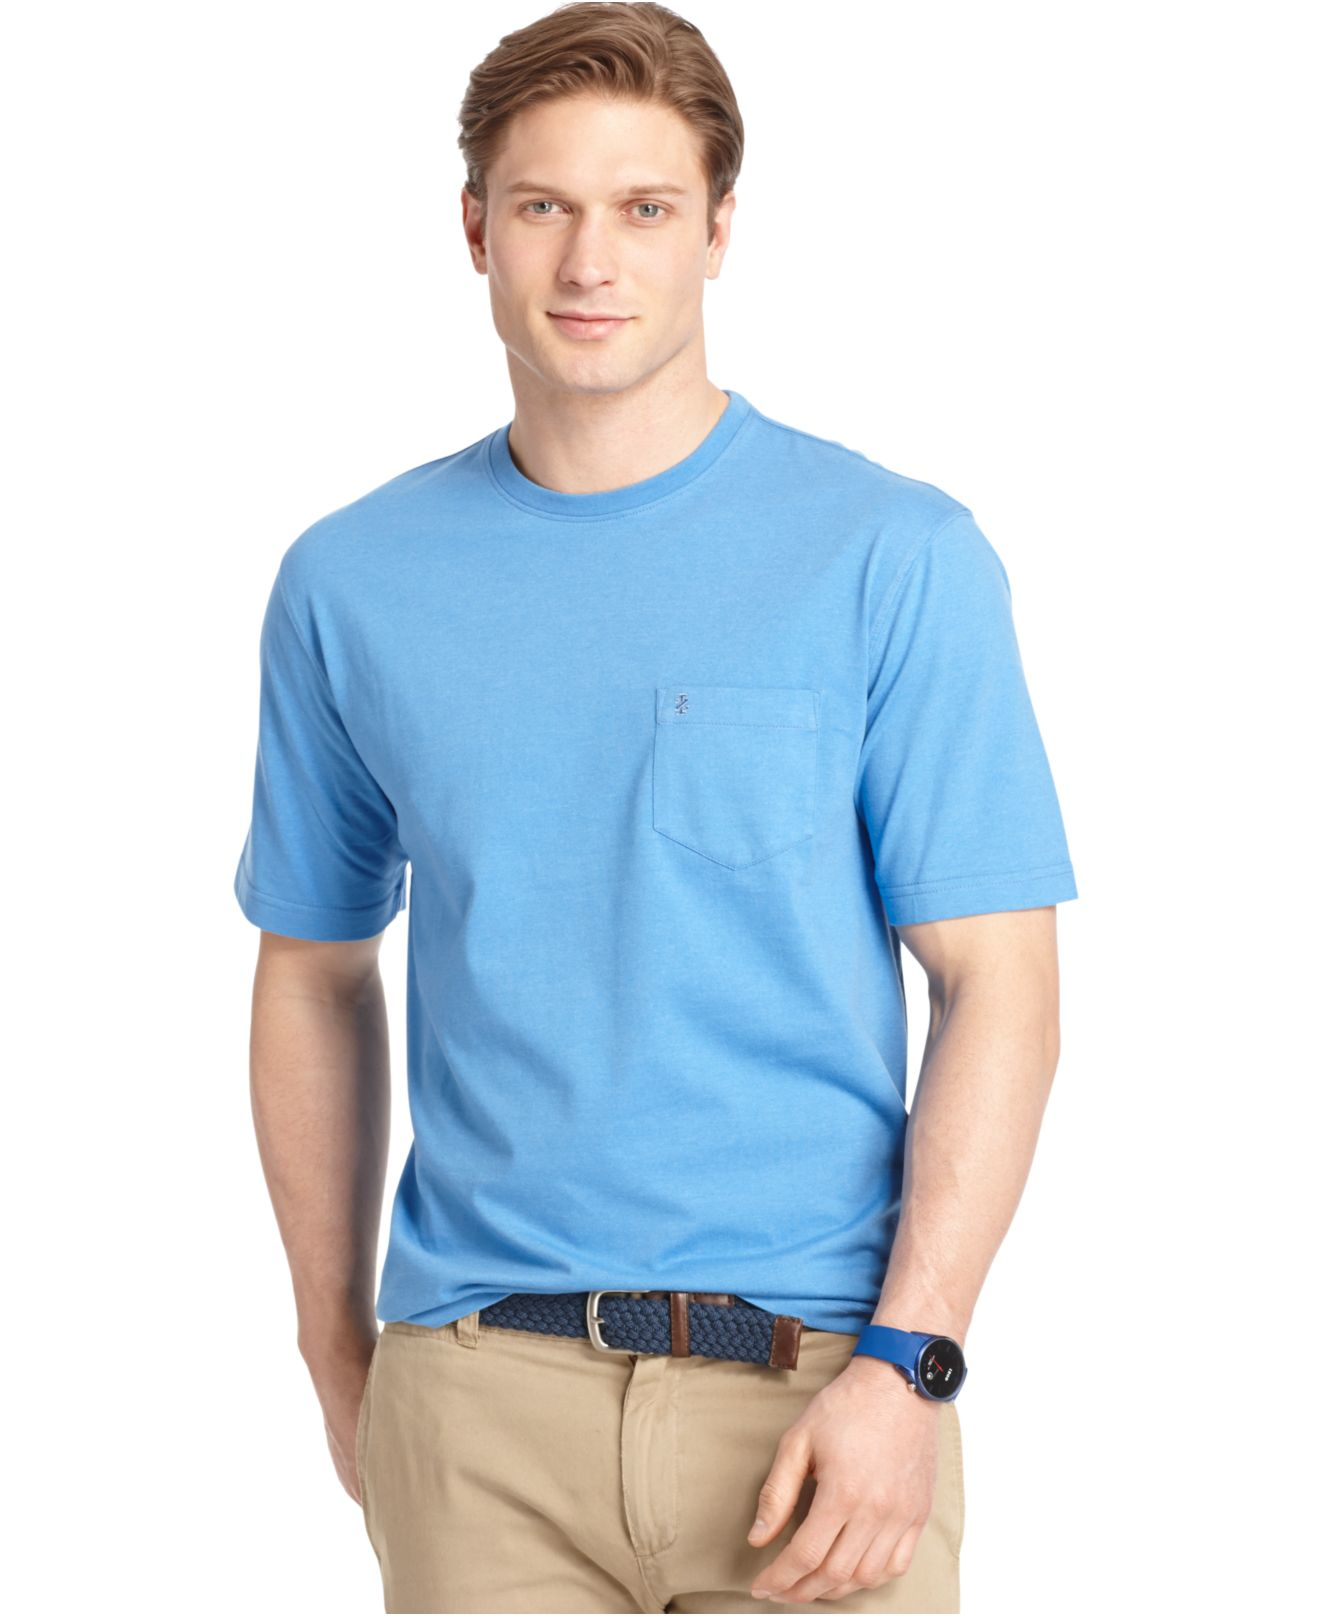 Izod Big And Tall Crew-neck Pocket T-shirt in Blue for Men - Lyst